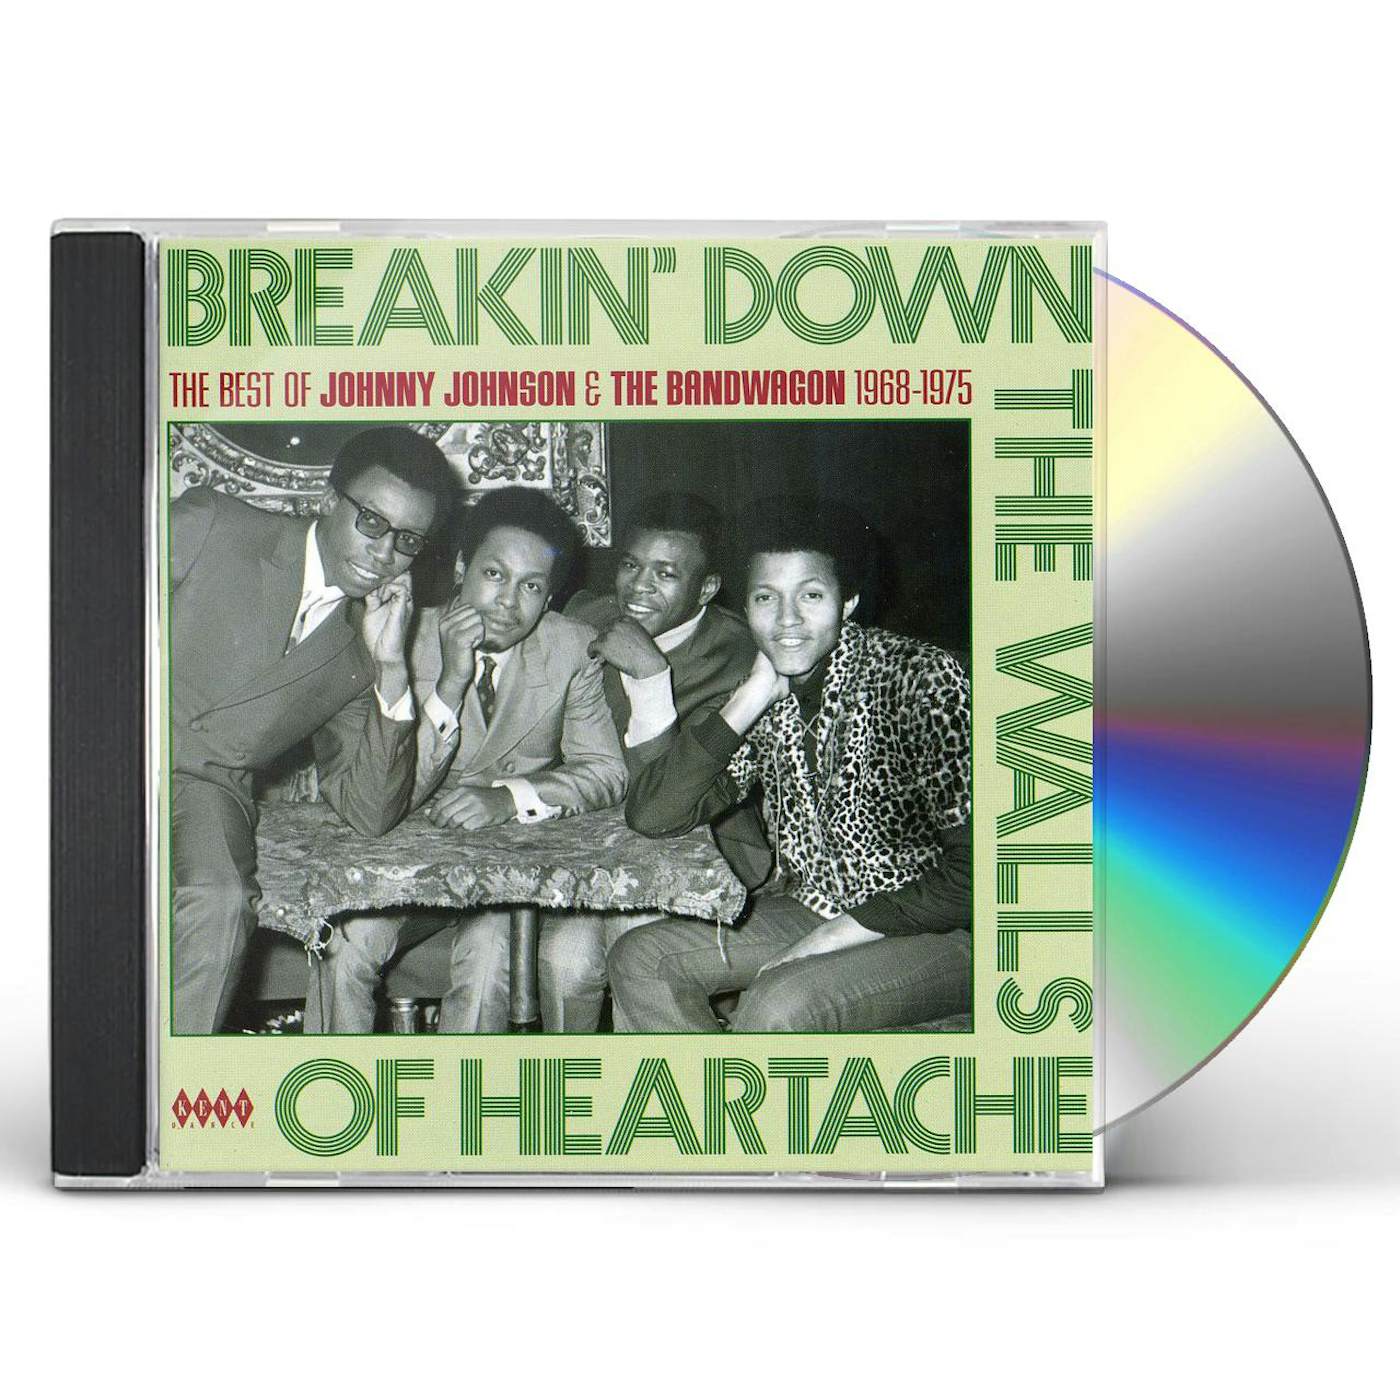 Johnny Johnson & The Bandwagon BREAKING DOWN THE WALLS OF HEARTACHE: THE BEST OF CD